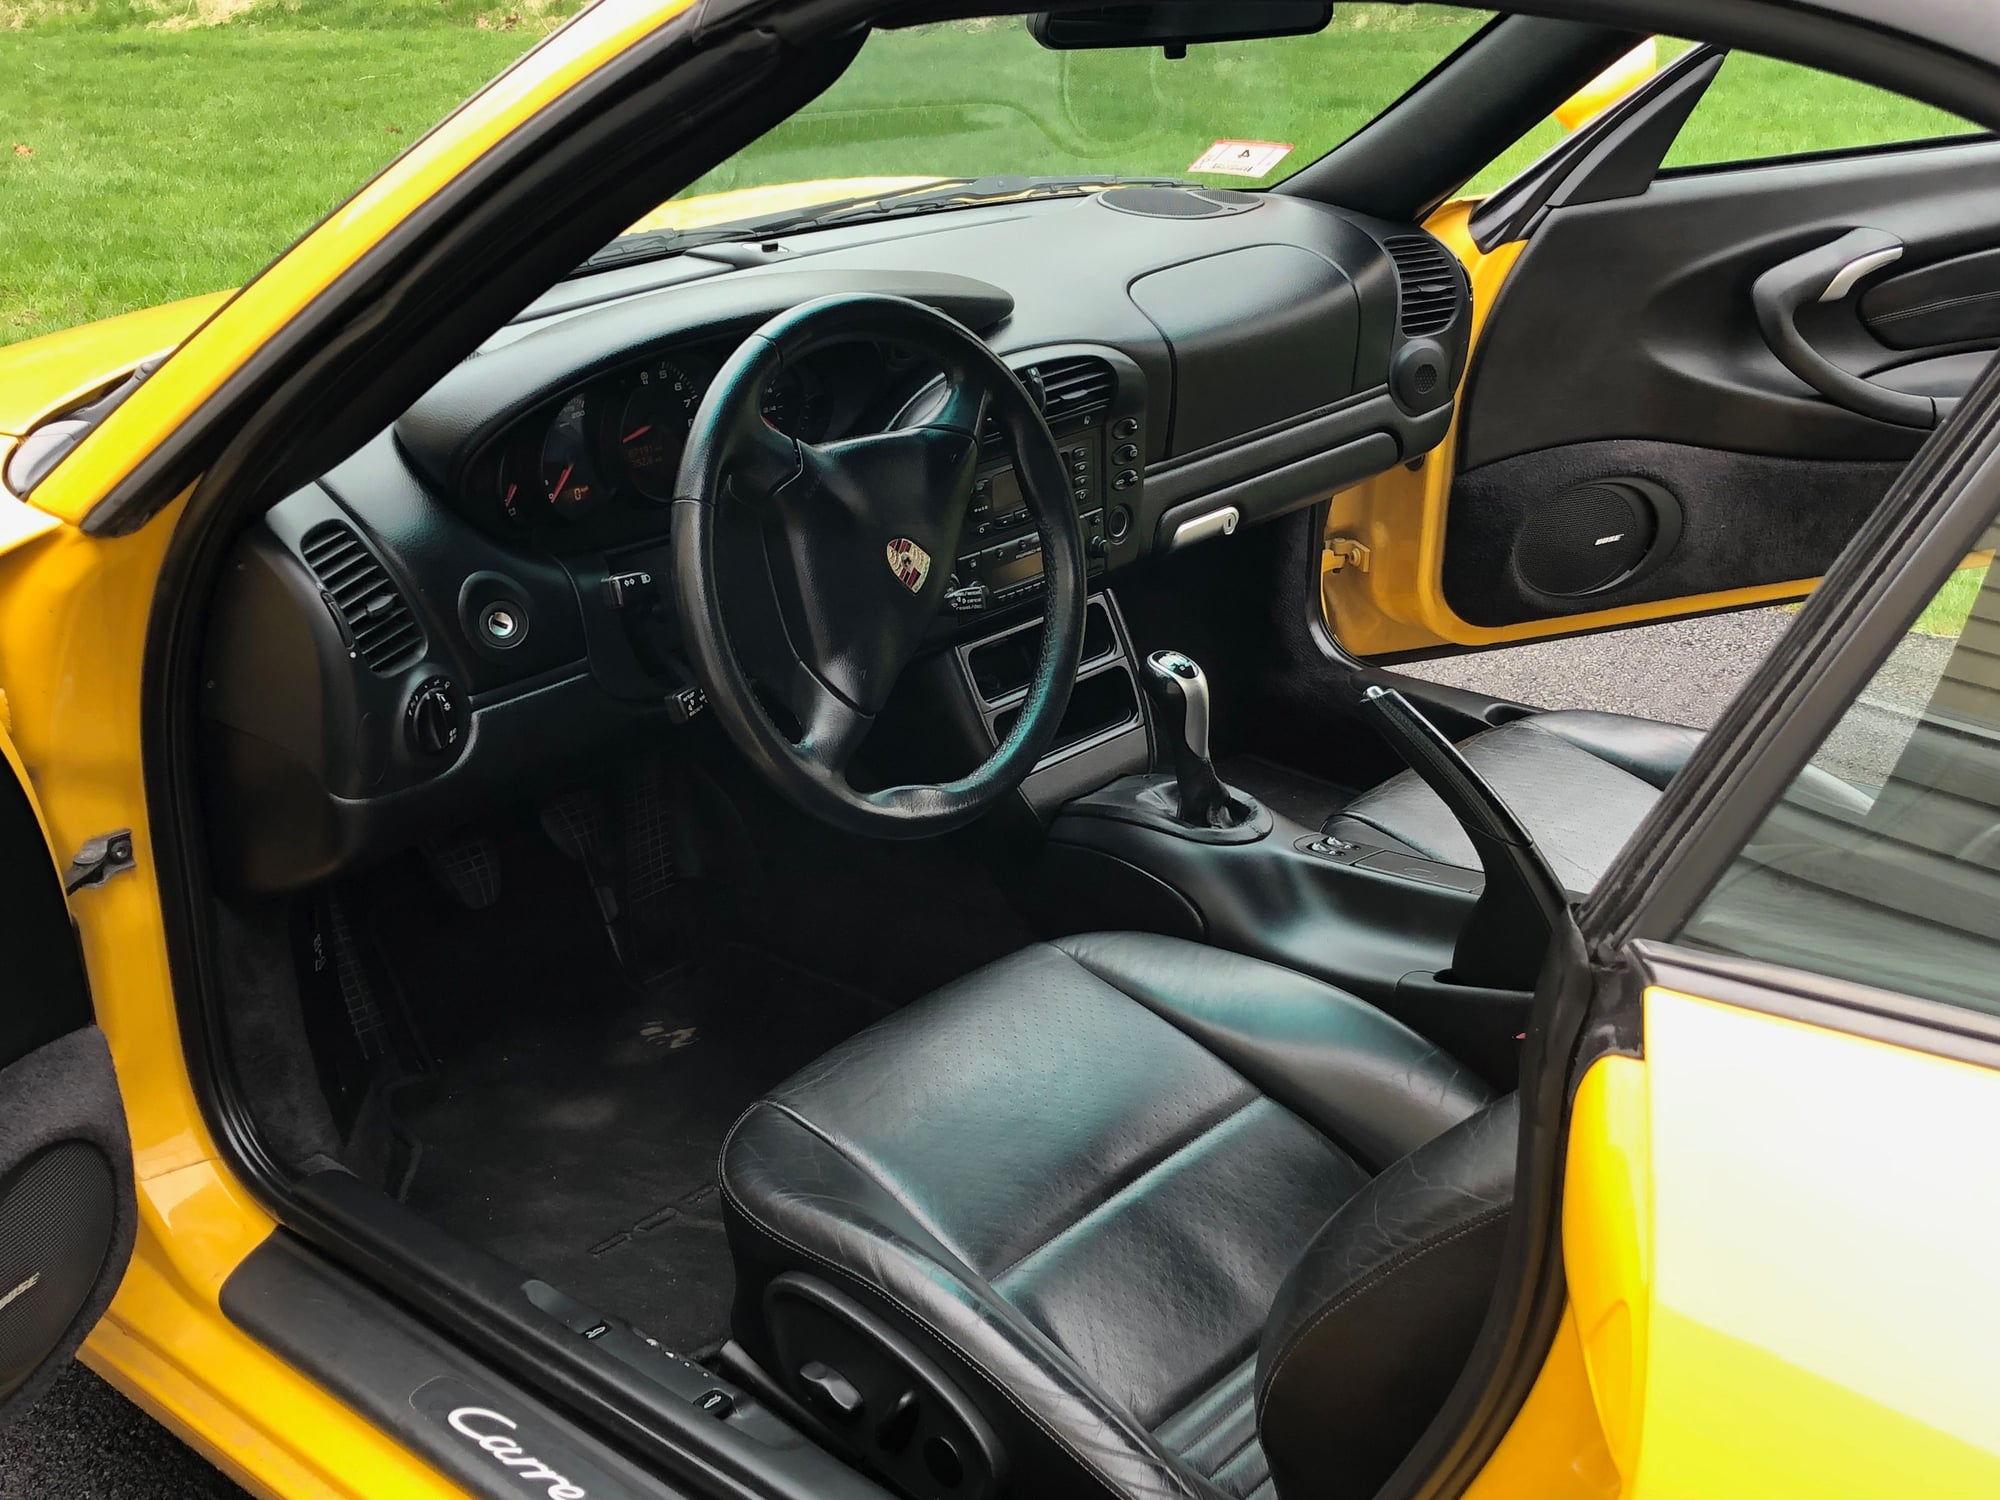 2002 Porsche 911 - 2002 Porsche 911 Cabriolet - Used - VIN WP0CA29962S655570 - 87,500 Miles - 6 cyl - 2WD - Manual - Convertible - Yellow - Groton, MA 01450, United States